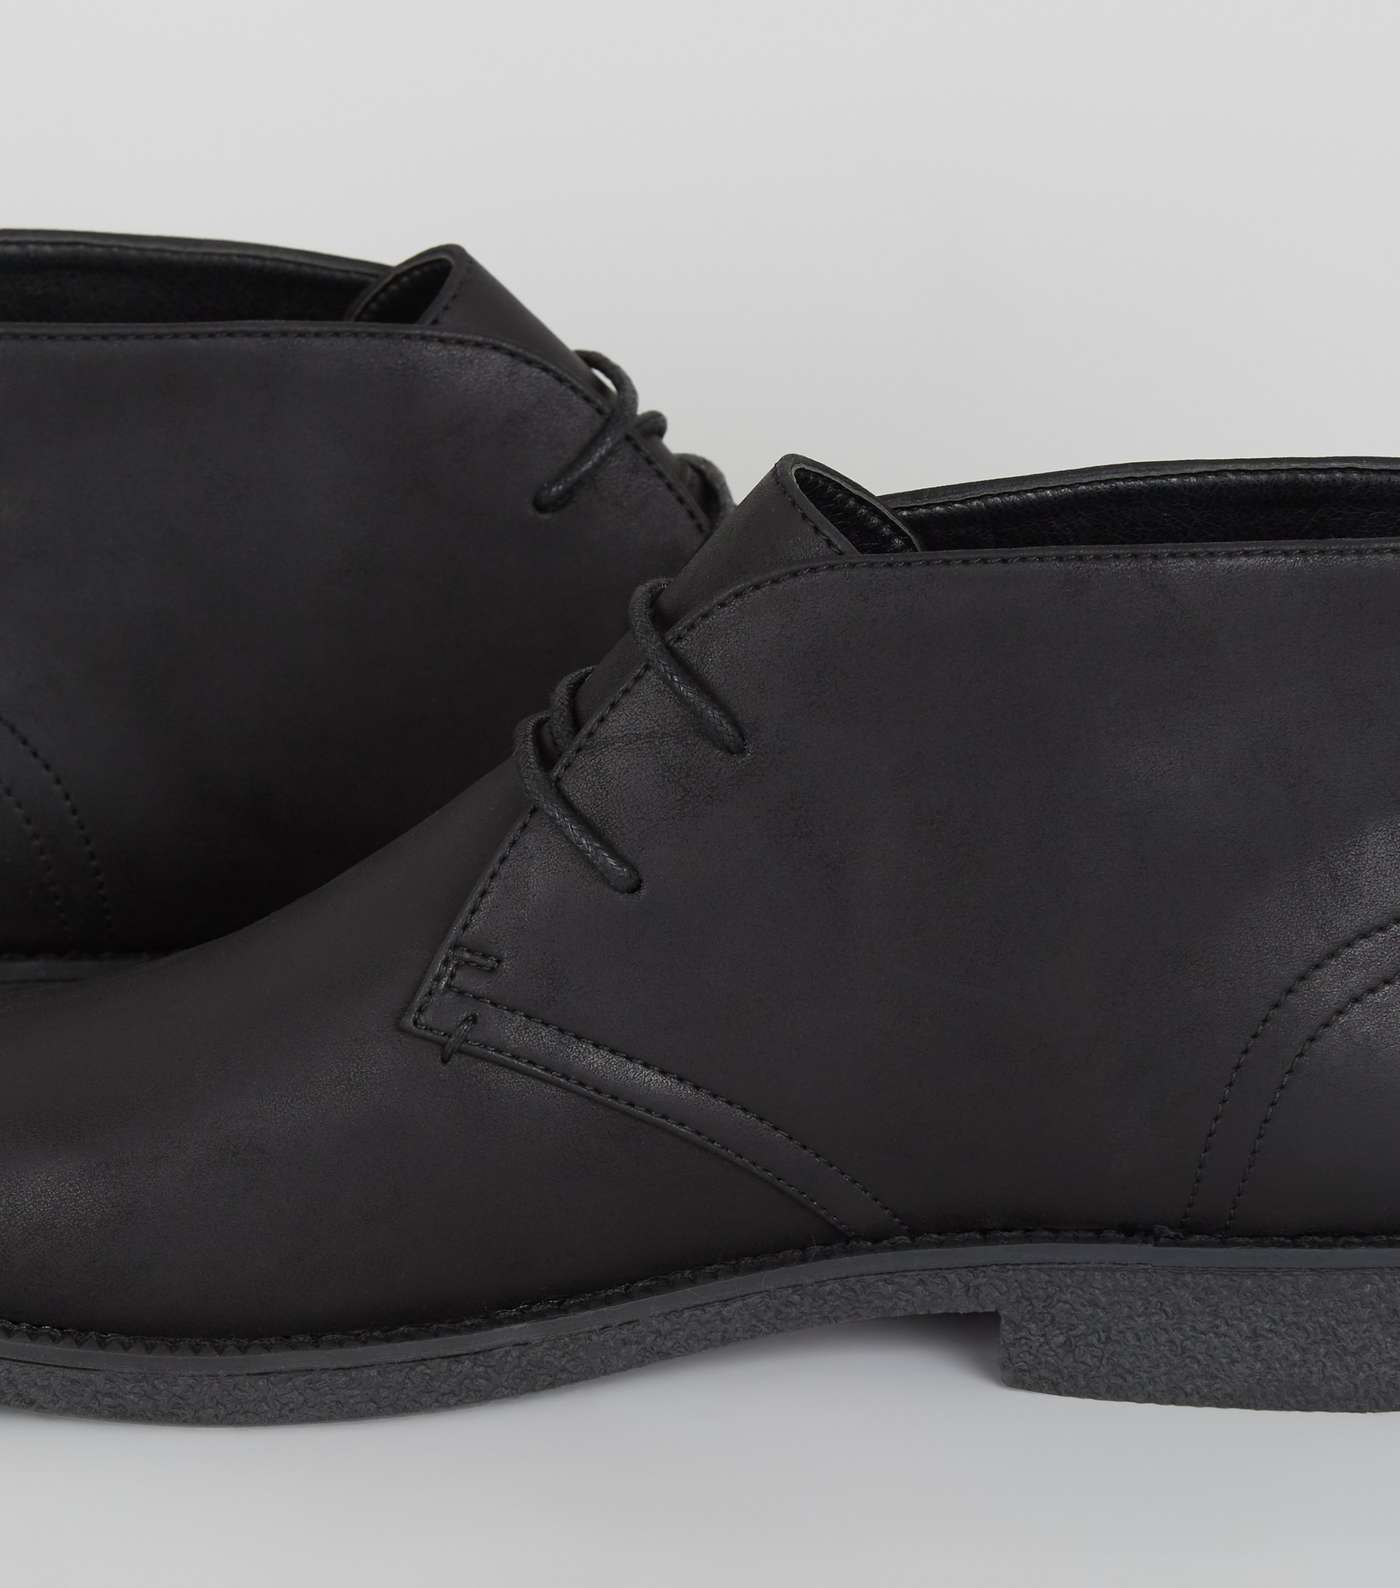 Black Leather-Look Desert Boots Image 4